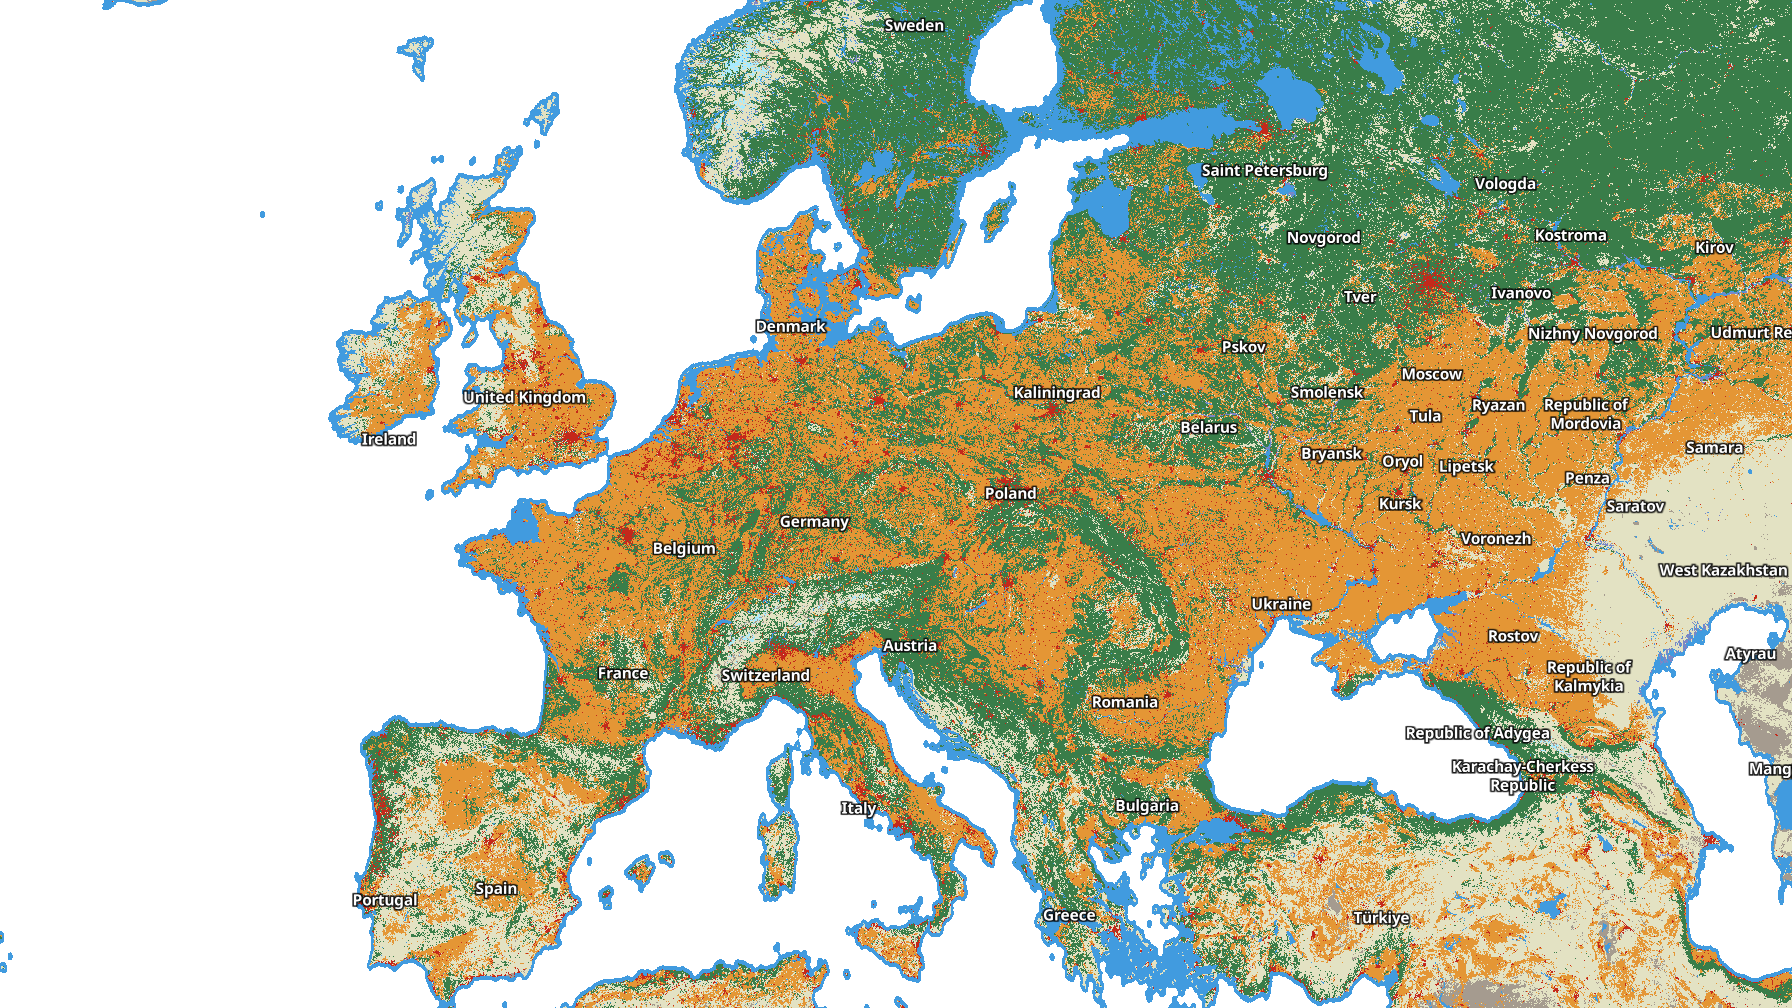 10m Annual Land Use Land Cover 2021, Europe